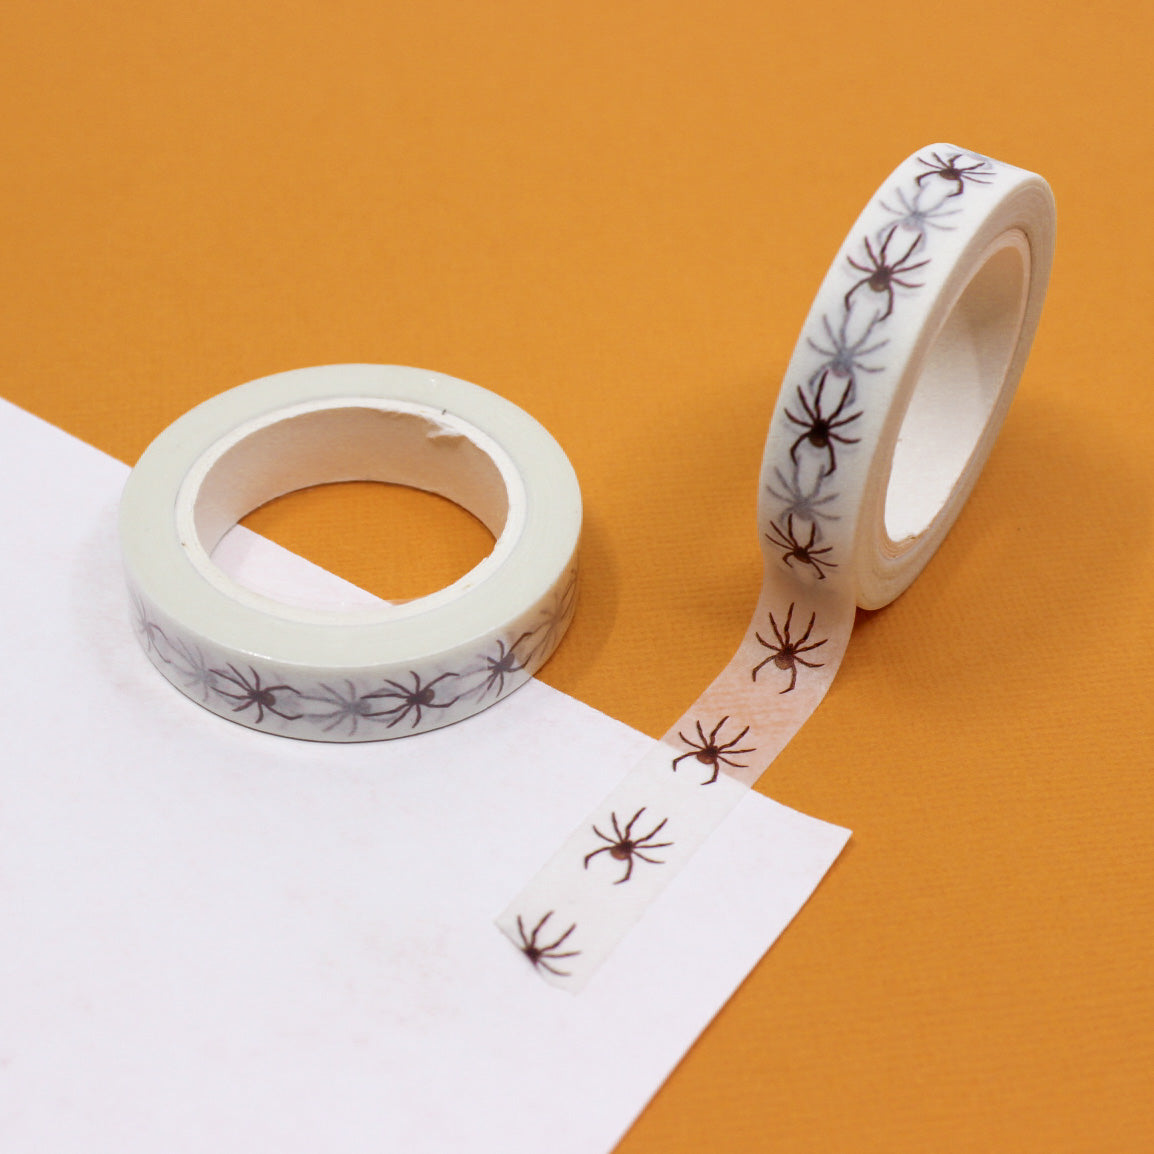  Ciieeo 12 Rolls Clear Tape Halloween Decor Scrapbook Adhesive  Tape Halloween Bloody Tapes Washi Tapes DIY Crafting Tape DIY Tape  Halloween Tape Ornaments Scary Tape Paper Creepy Stickers : Arts, Crafts